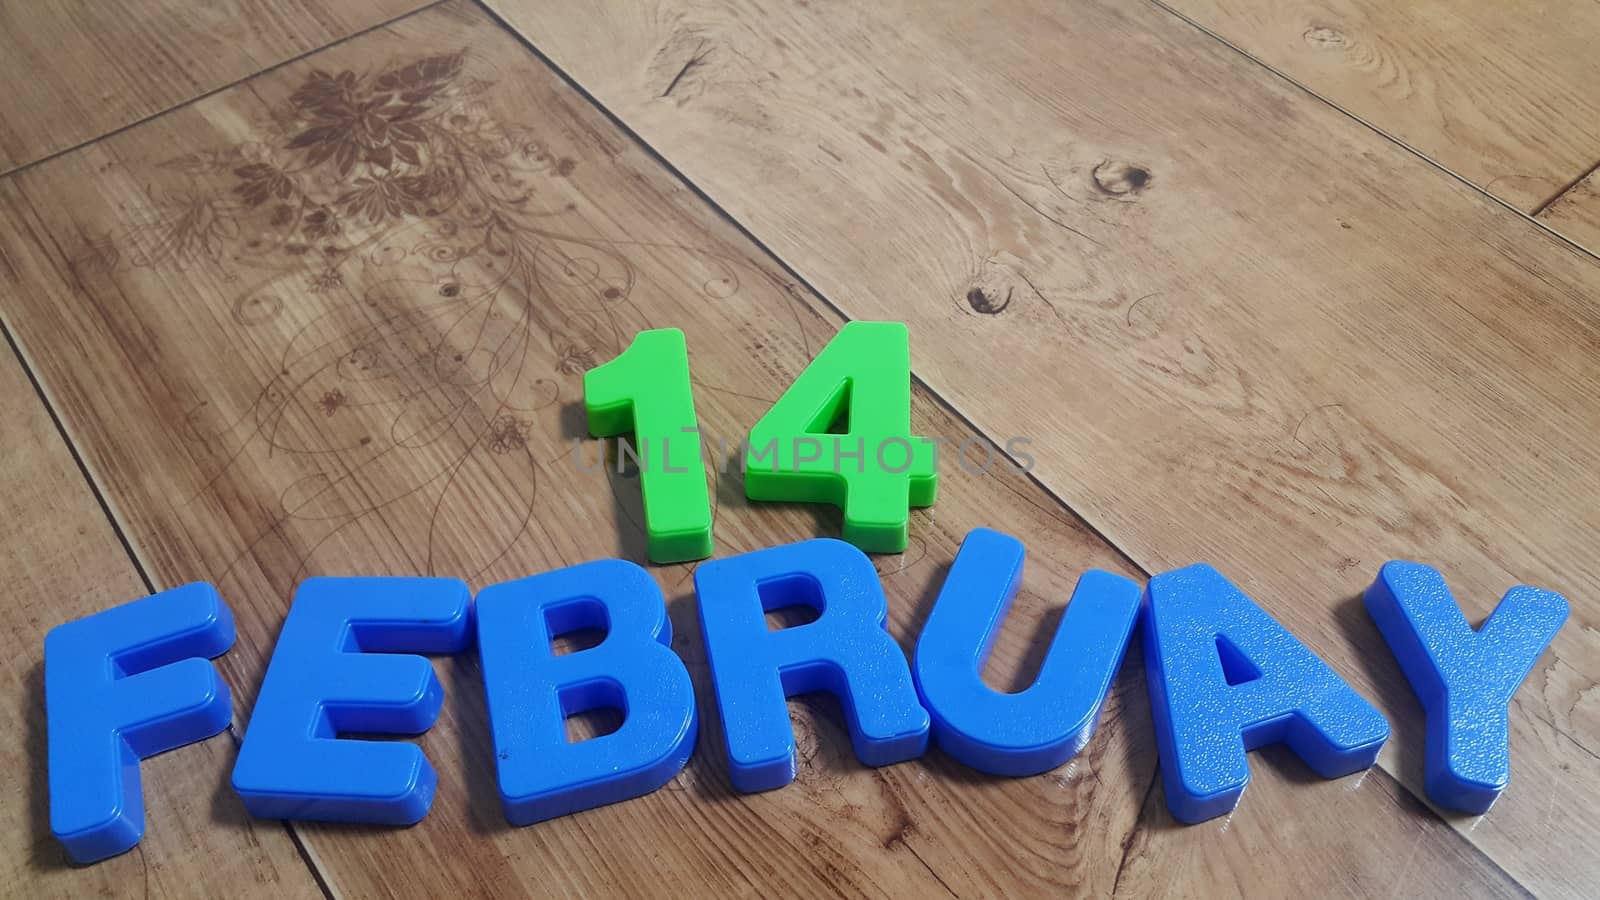 Plastic colored alphabets making words 14 February are placed on a wooden floor. These plastic letters can be used for teaching kids.